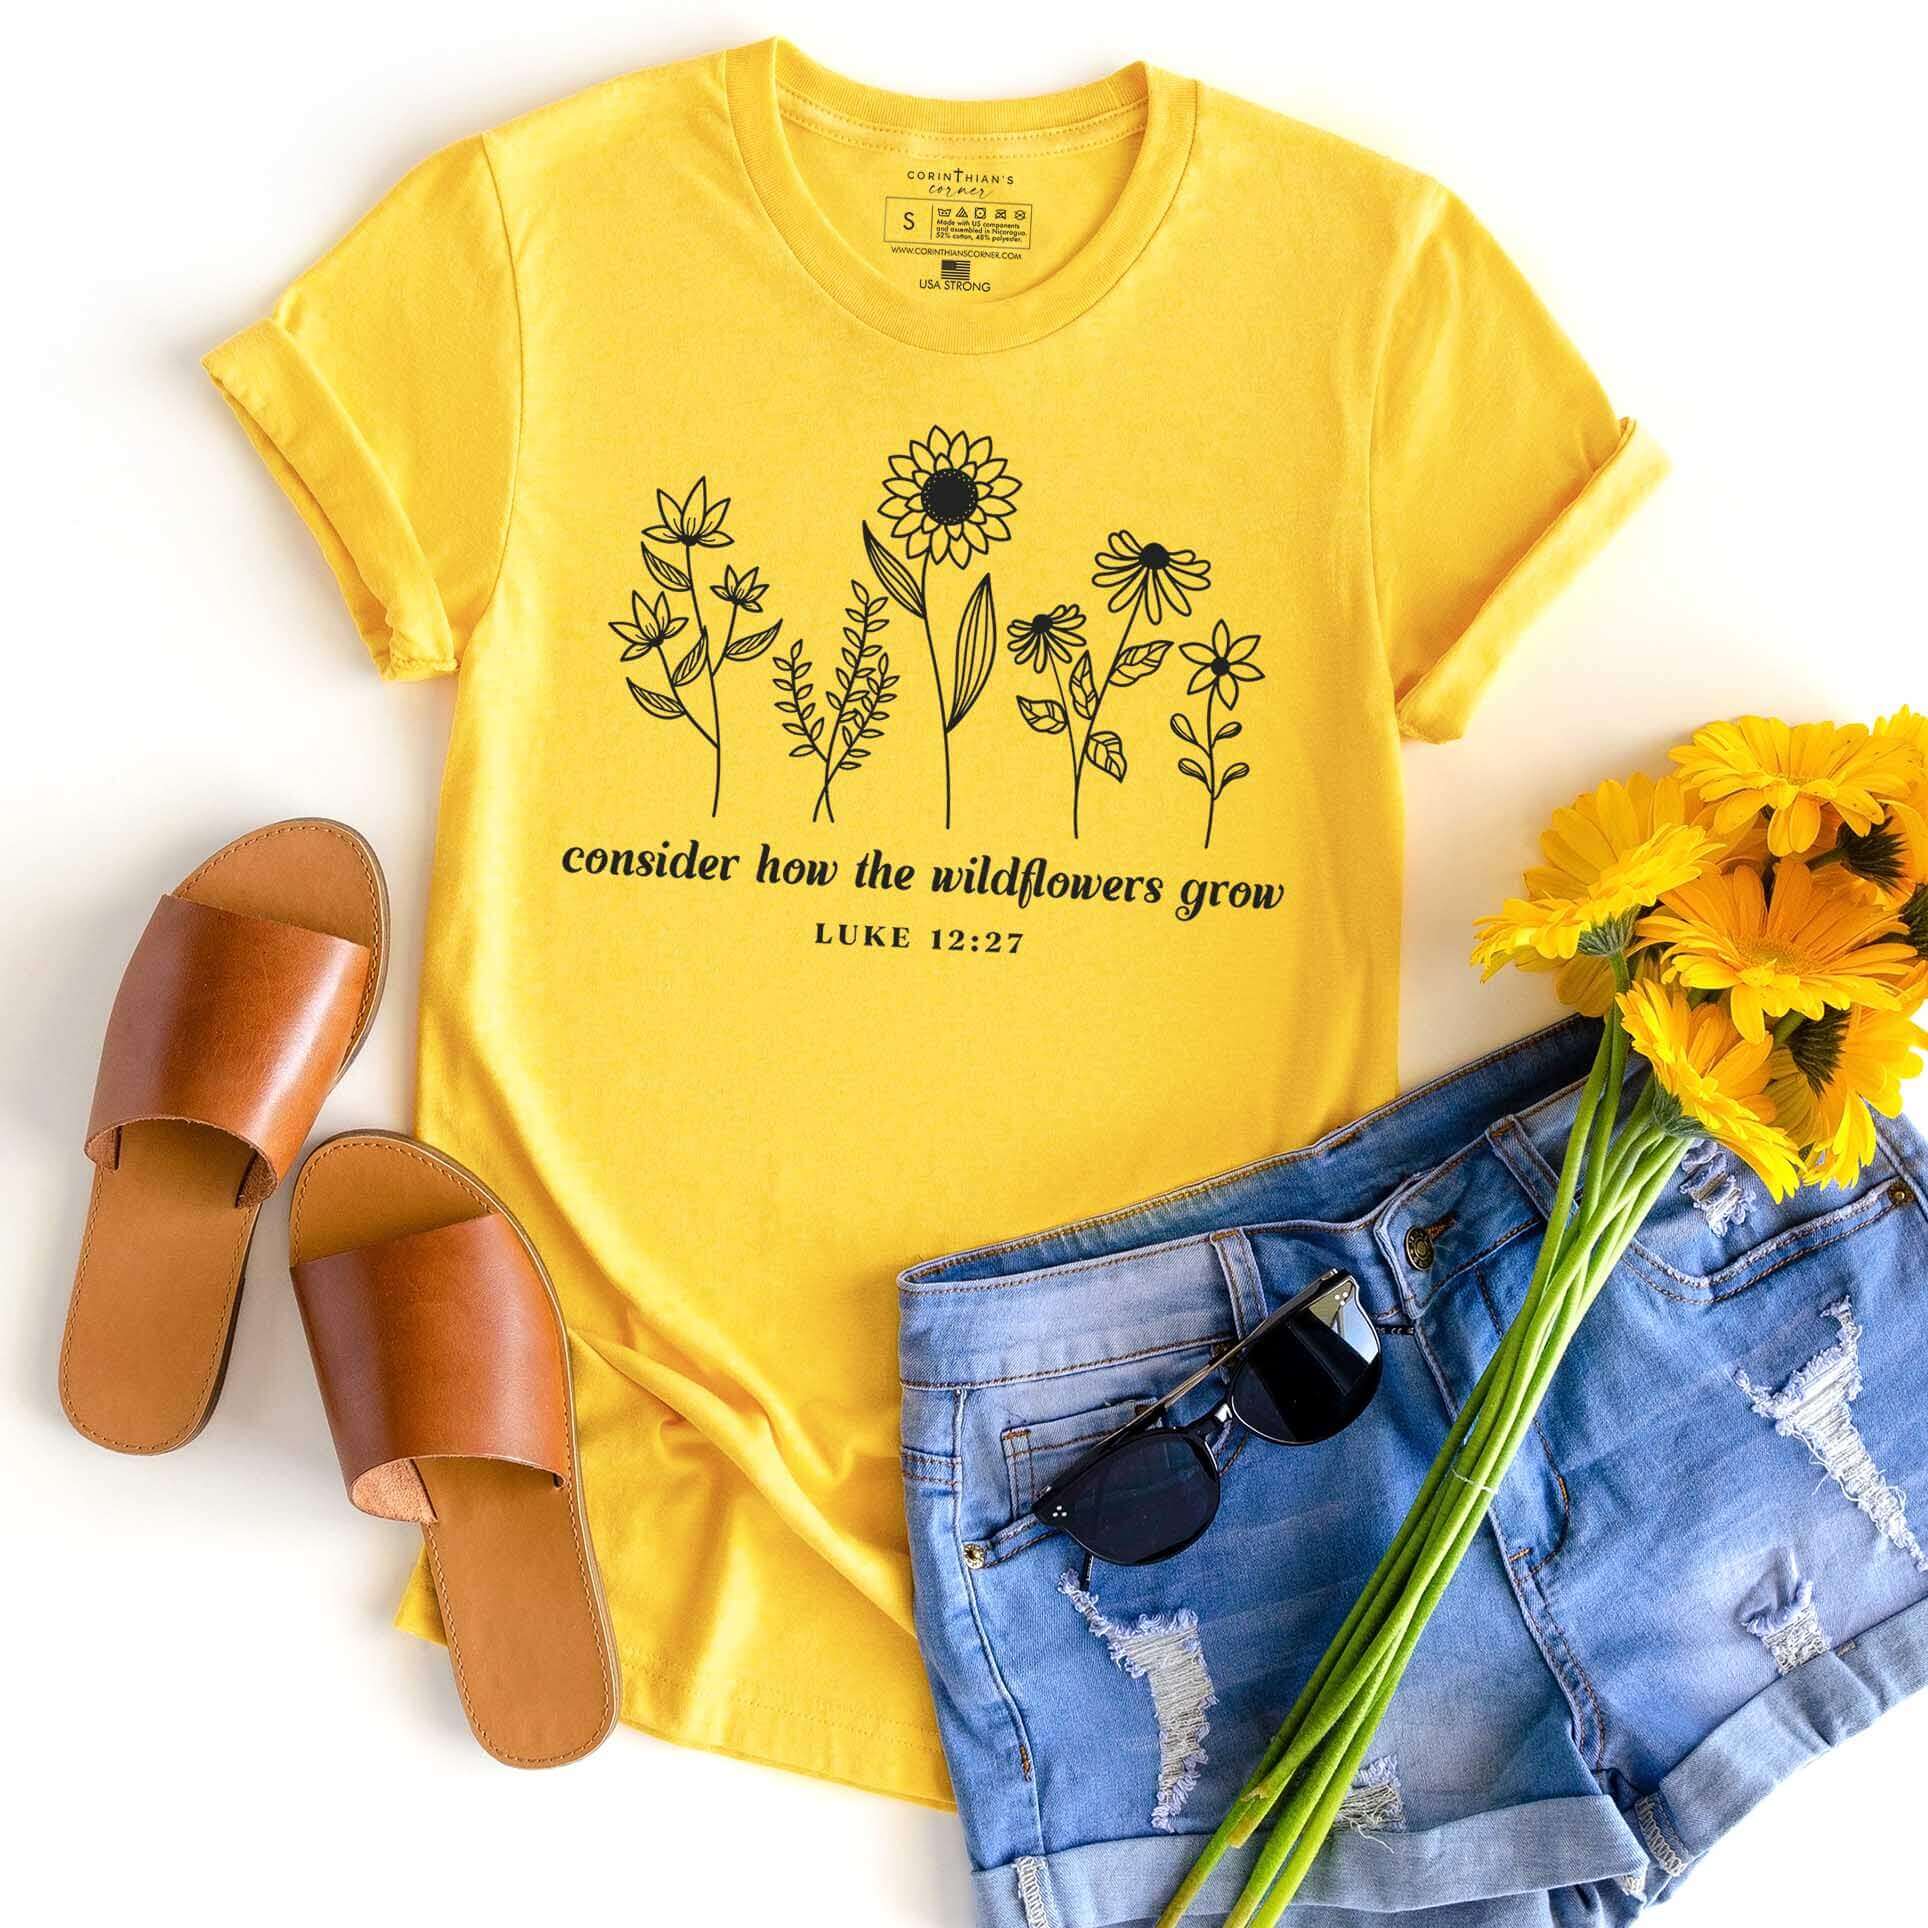 Bright yellow tee with the Biblical passage Luke 12:27 and a collection of beautiful wildflowers